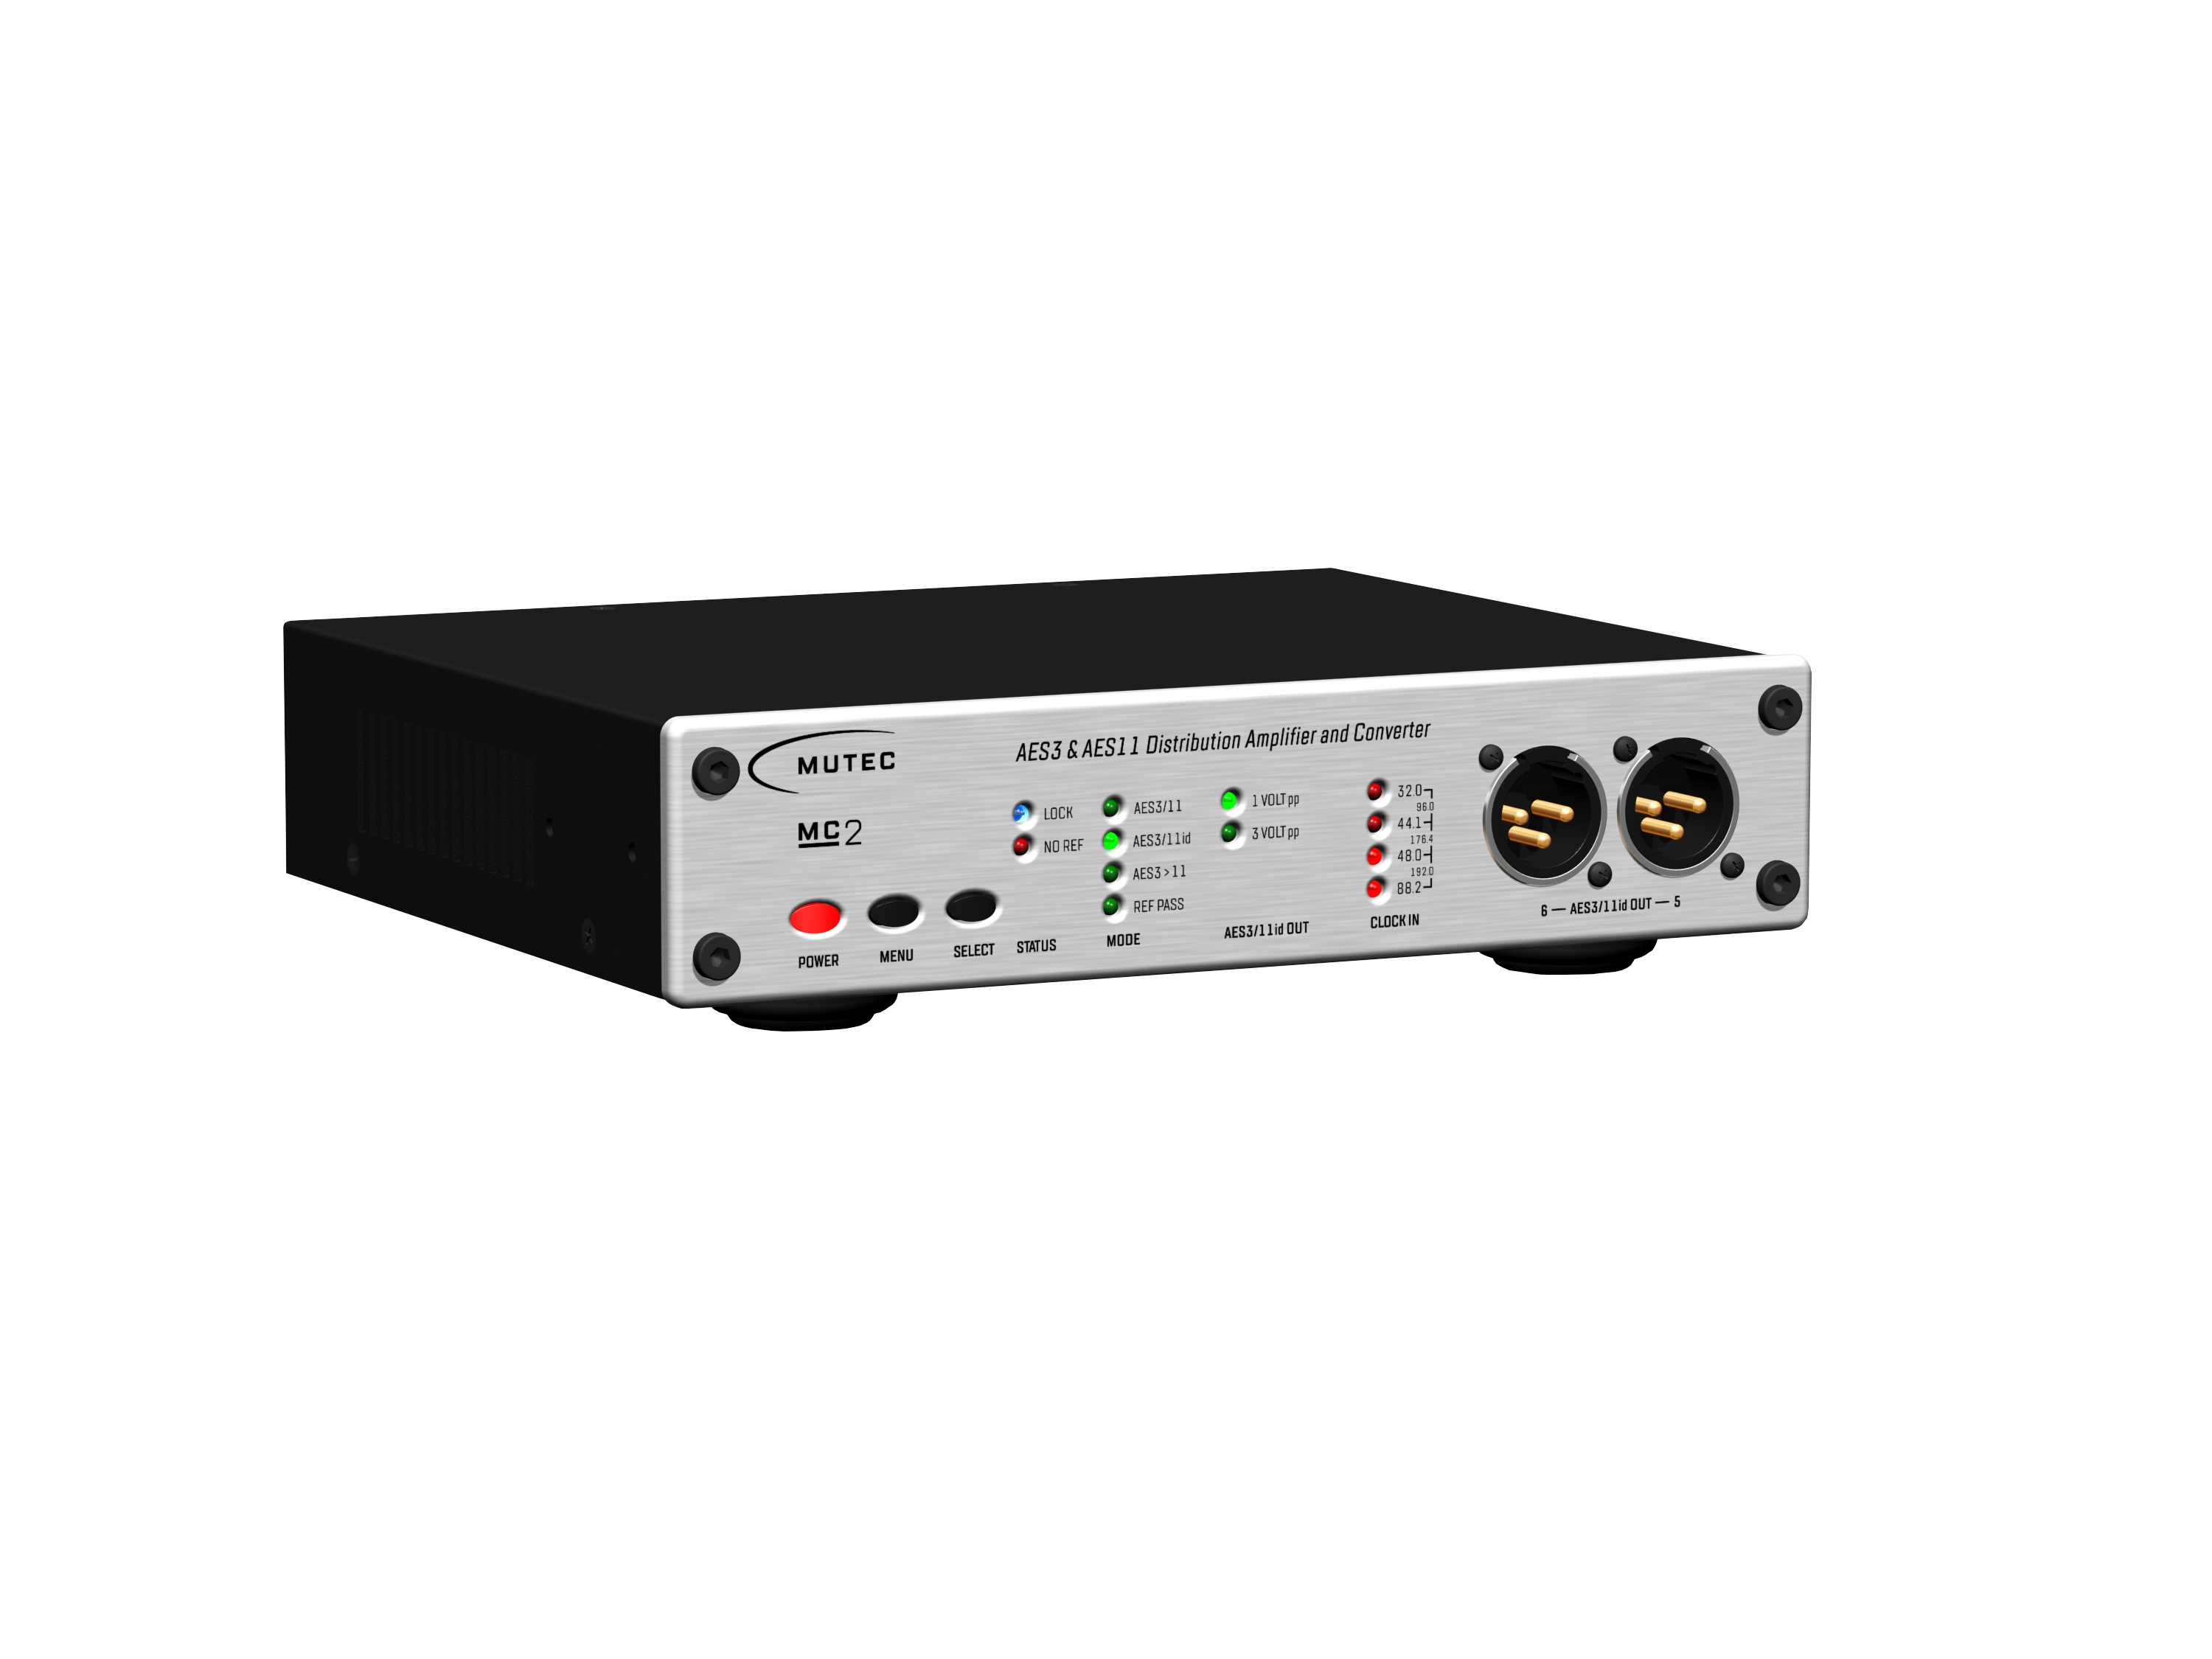 MC2 Distribution Amplifier and Format Converter for AES/EBU and AES/EBU ID by Mutec